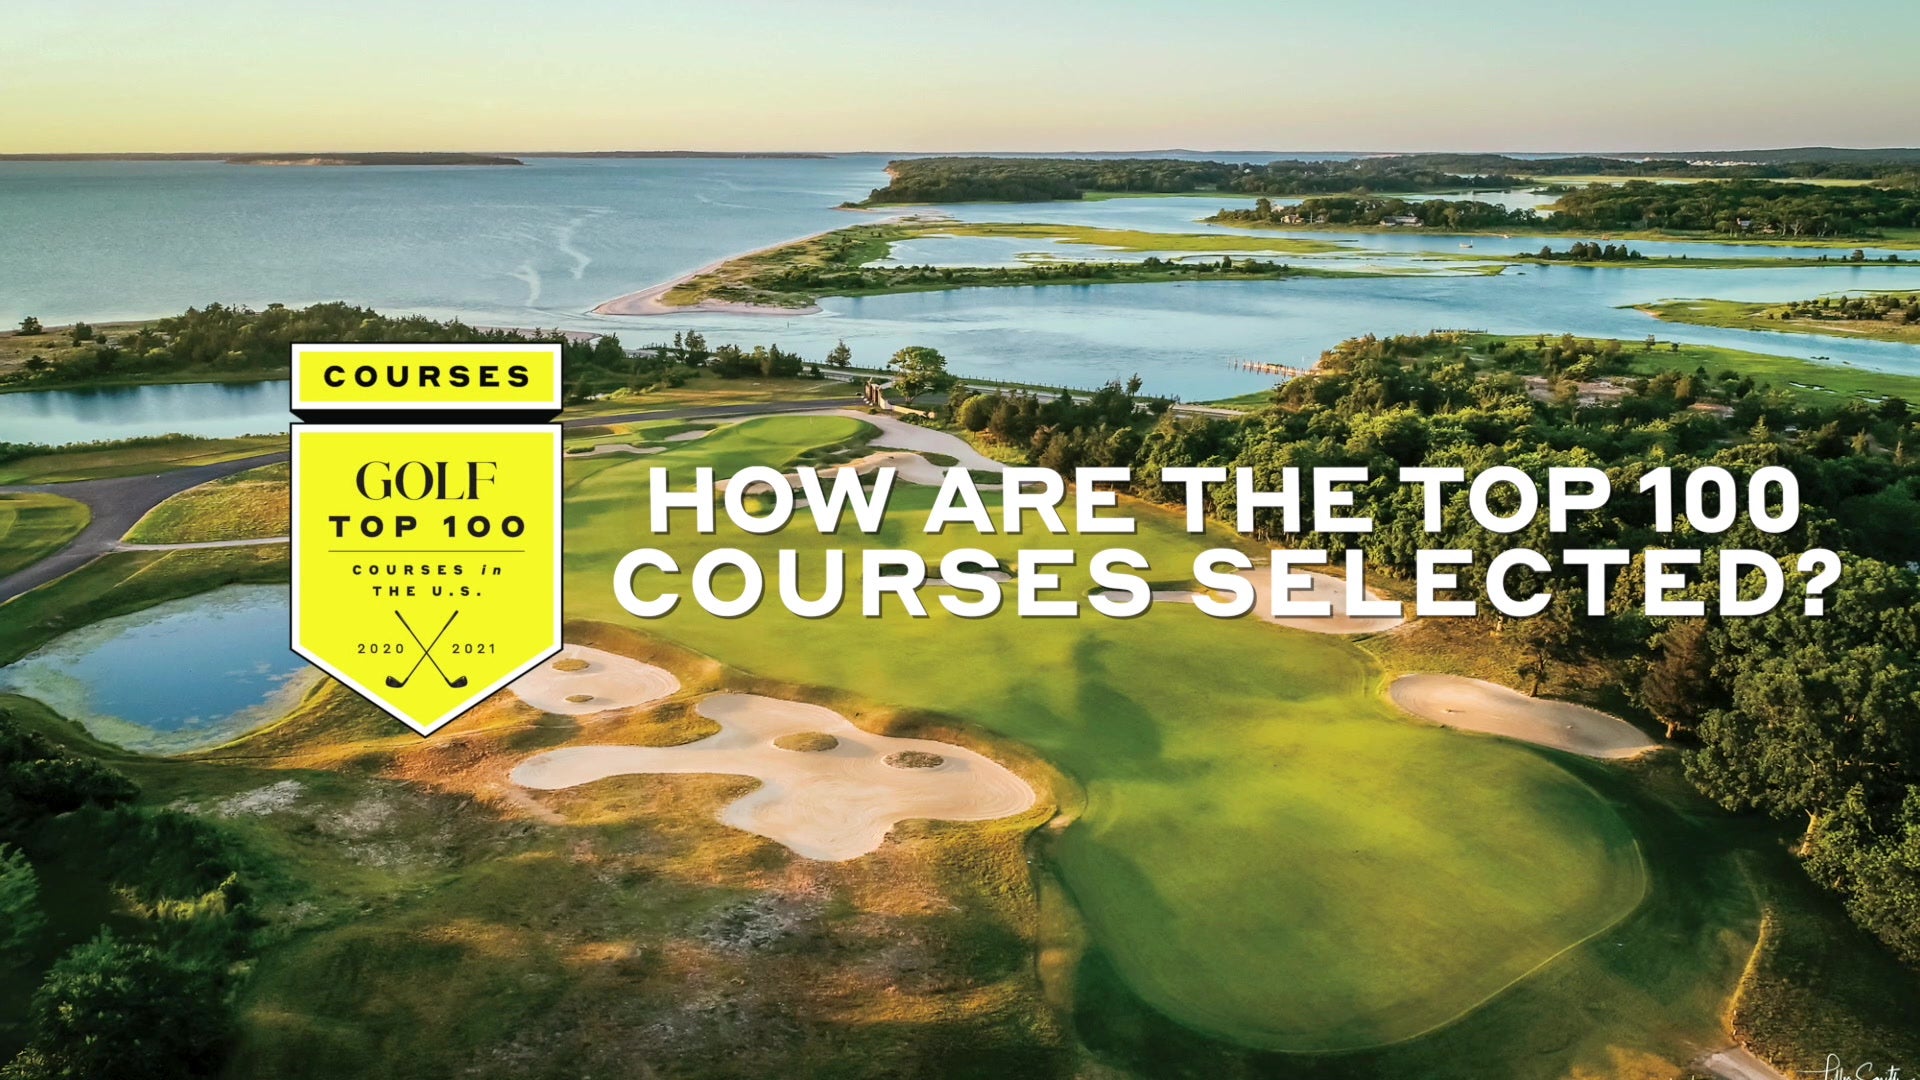 Our experts break down GOLF's latest Top 100 Courses in the U.S. ranking